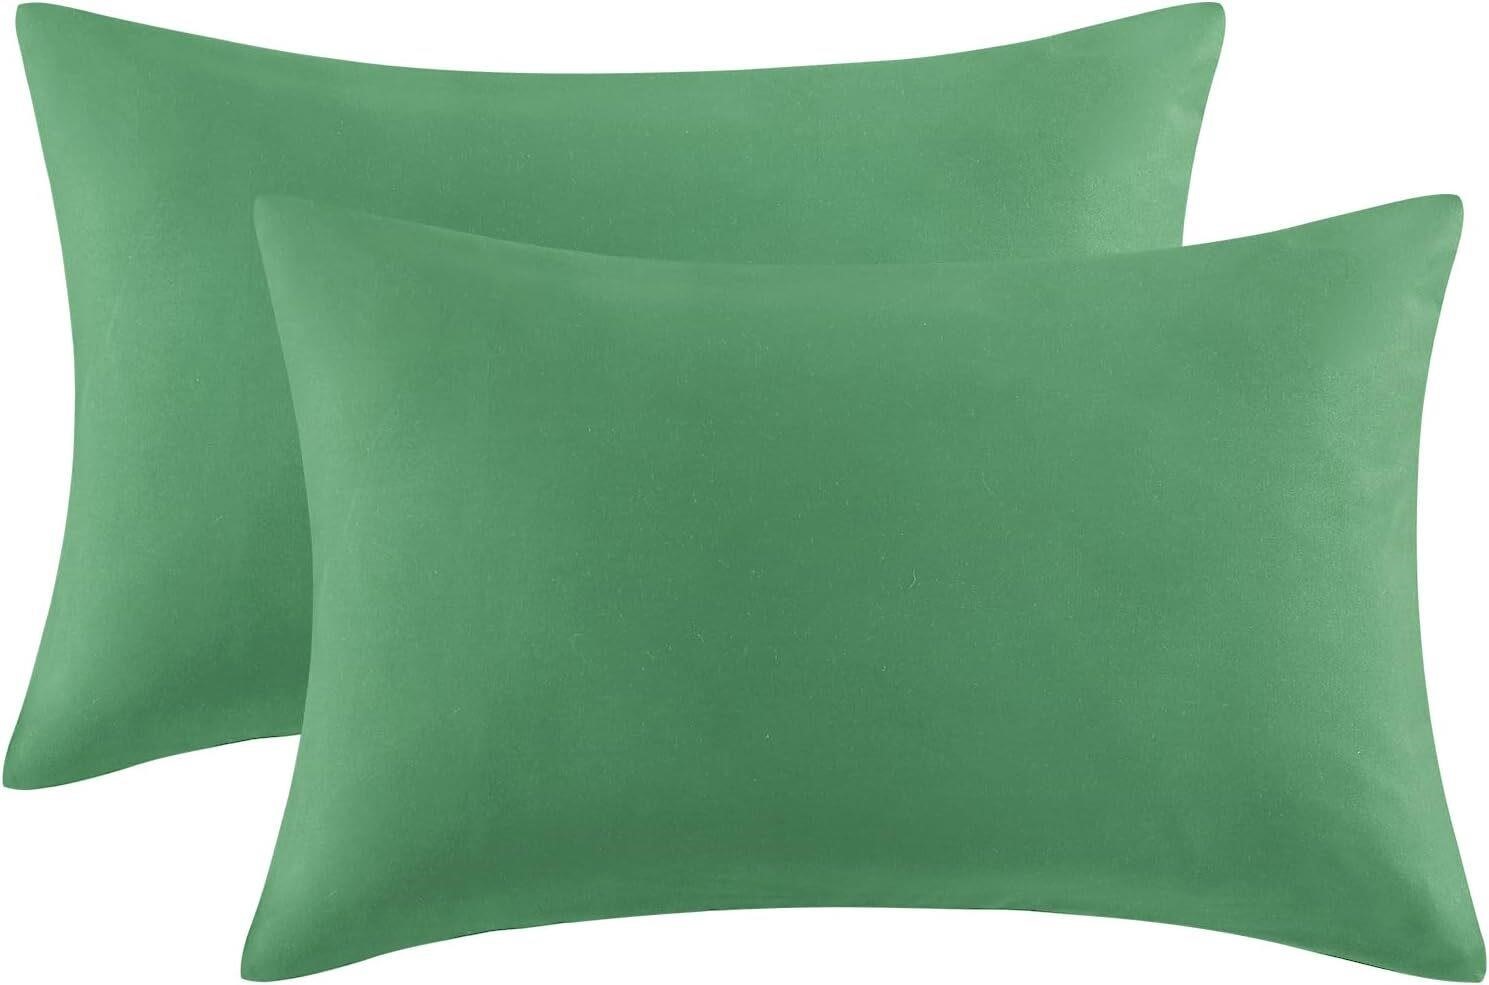 Aisbo King Pillow Cases  Sage Green  20x36